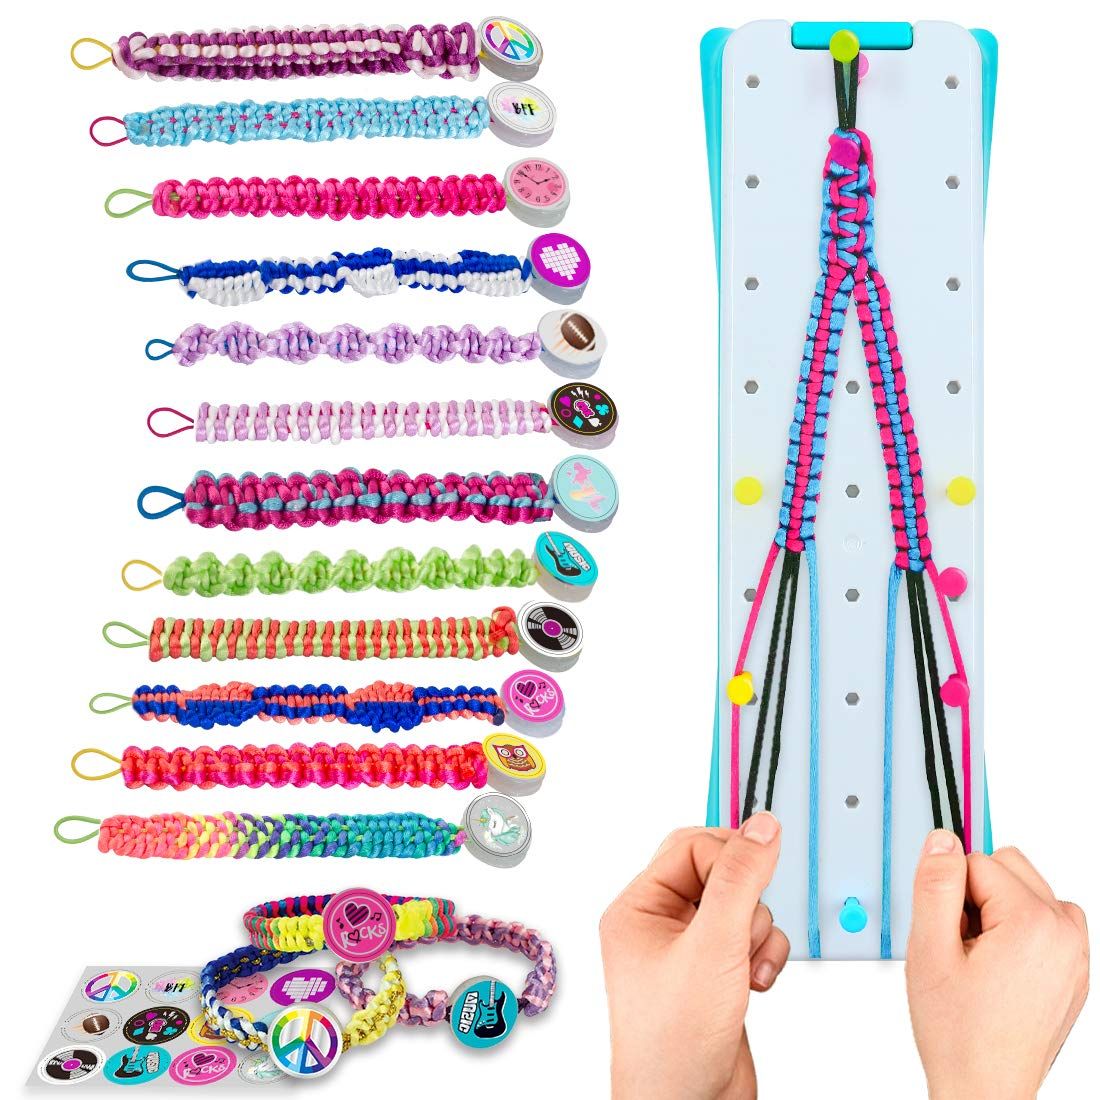 Friendship Bracelet Making Kit  Craft and crochet kits gifts and  accessories by Stitching Me Softly